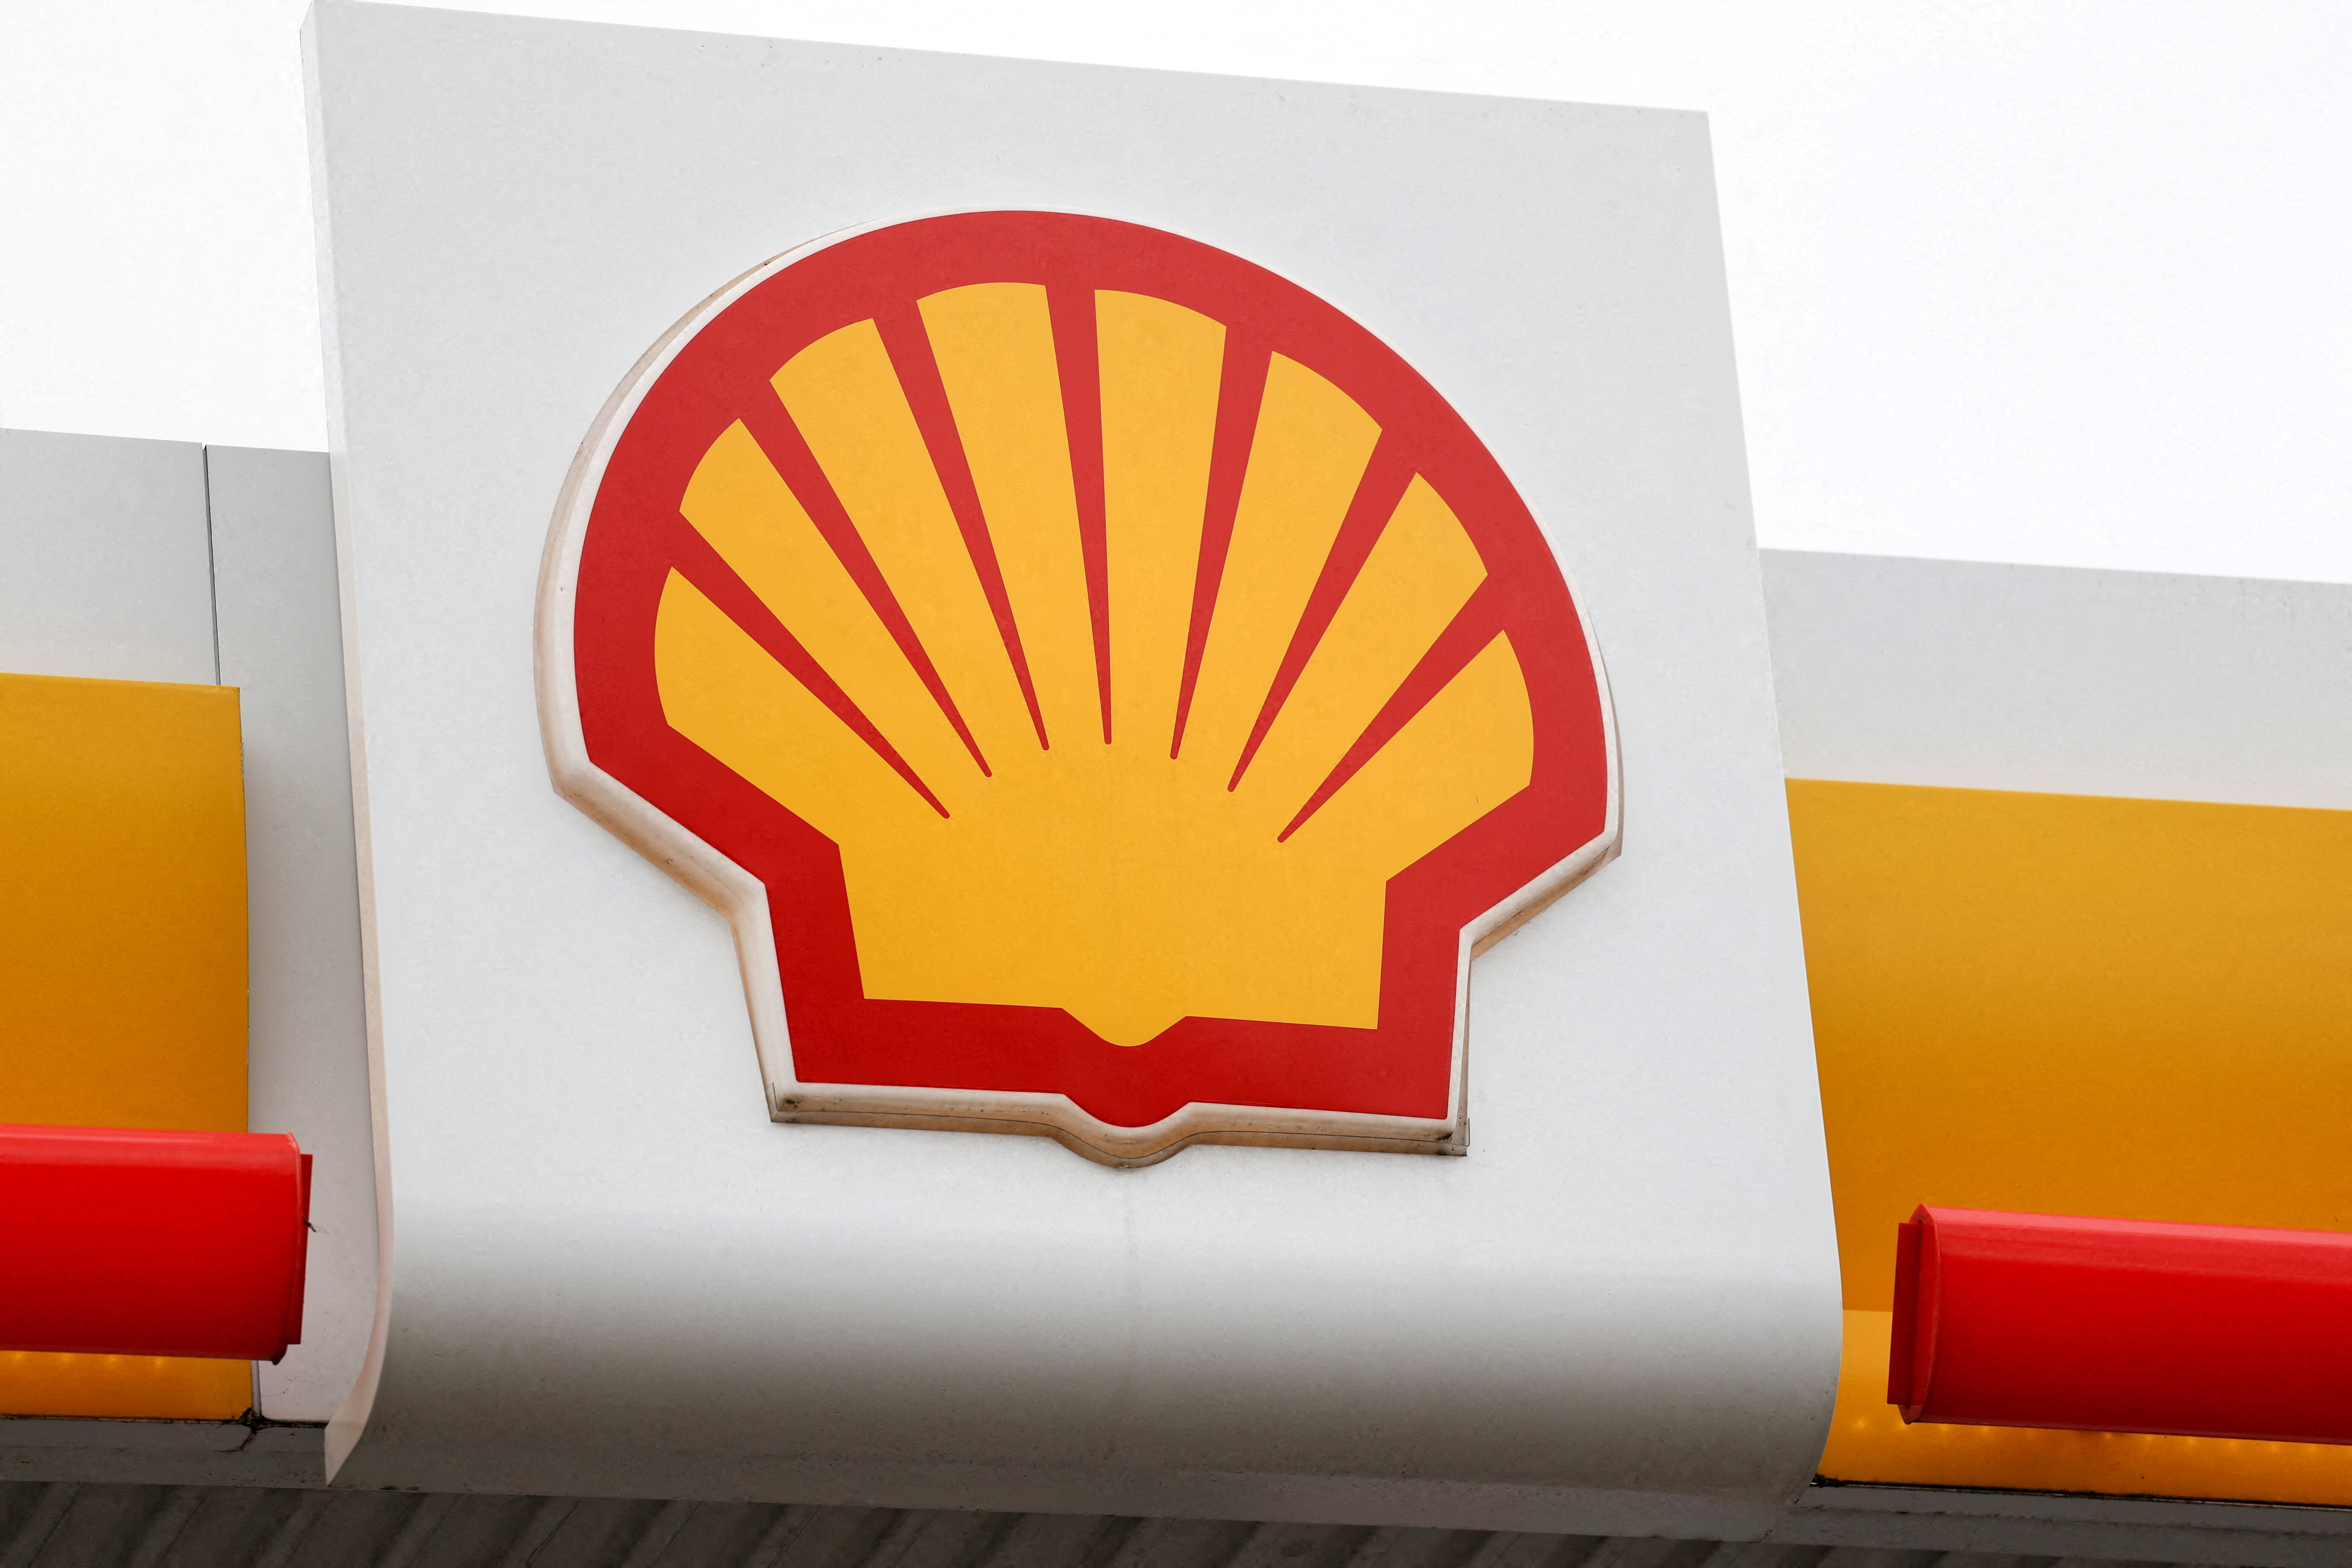 FILE PHOTO: A view shows a logo of Shell petrol station in South East London, Britain, February 2, 2023. REUTERS/May James//File Photo